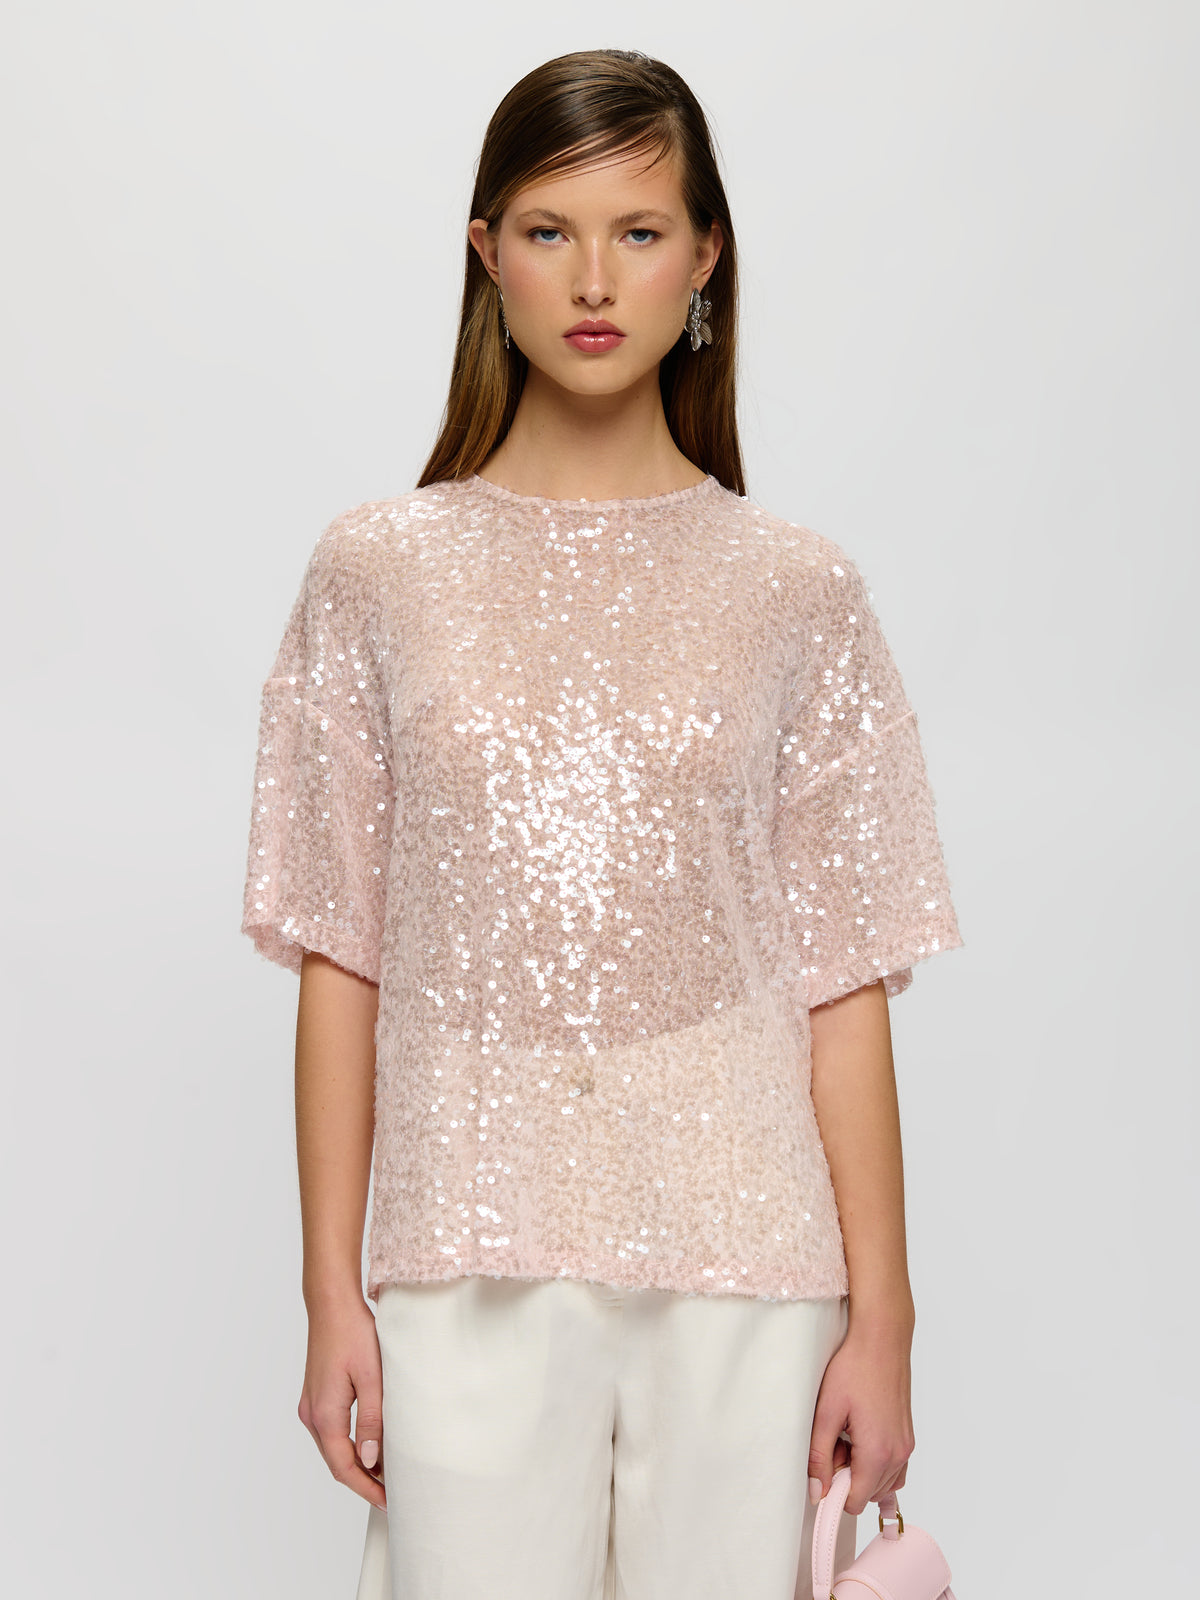 Sequin Boxy Style T-Shirt